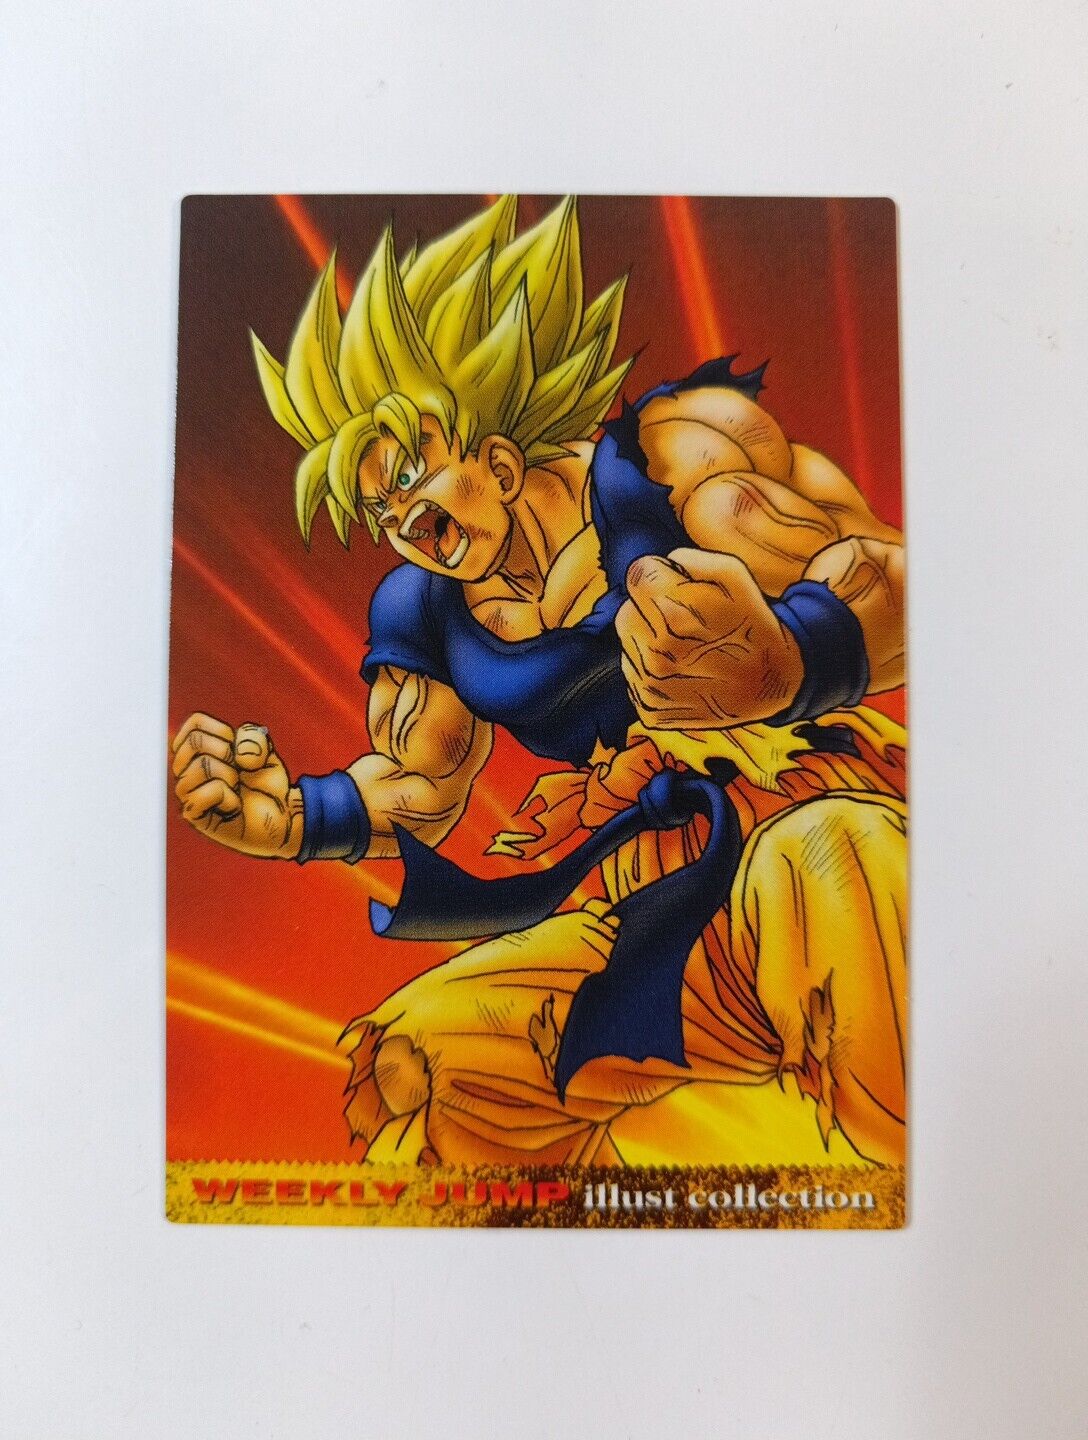 JAPAN CARD Dragon Ball Weekly Jump Collection Shueisha Out of Limited Series